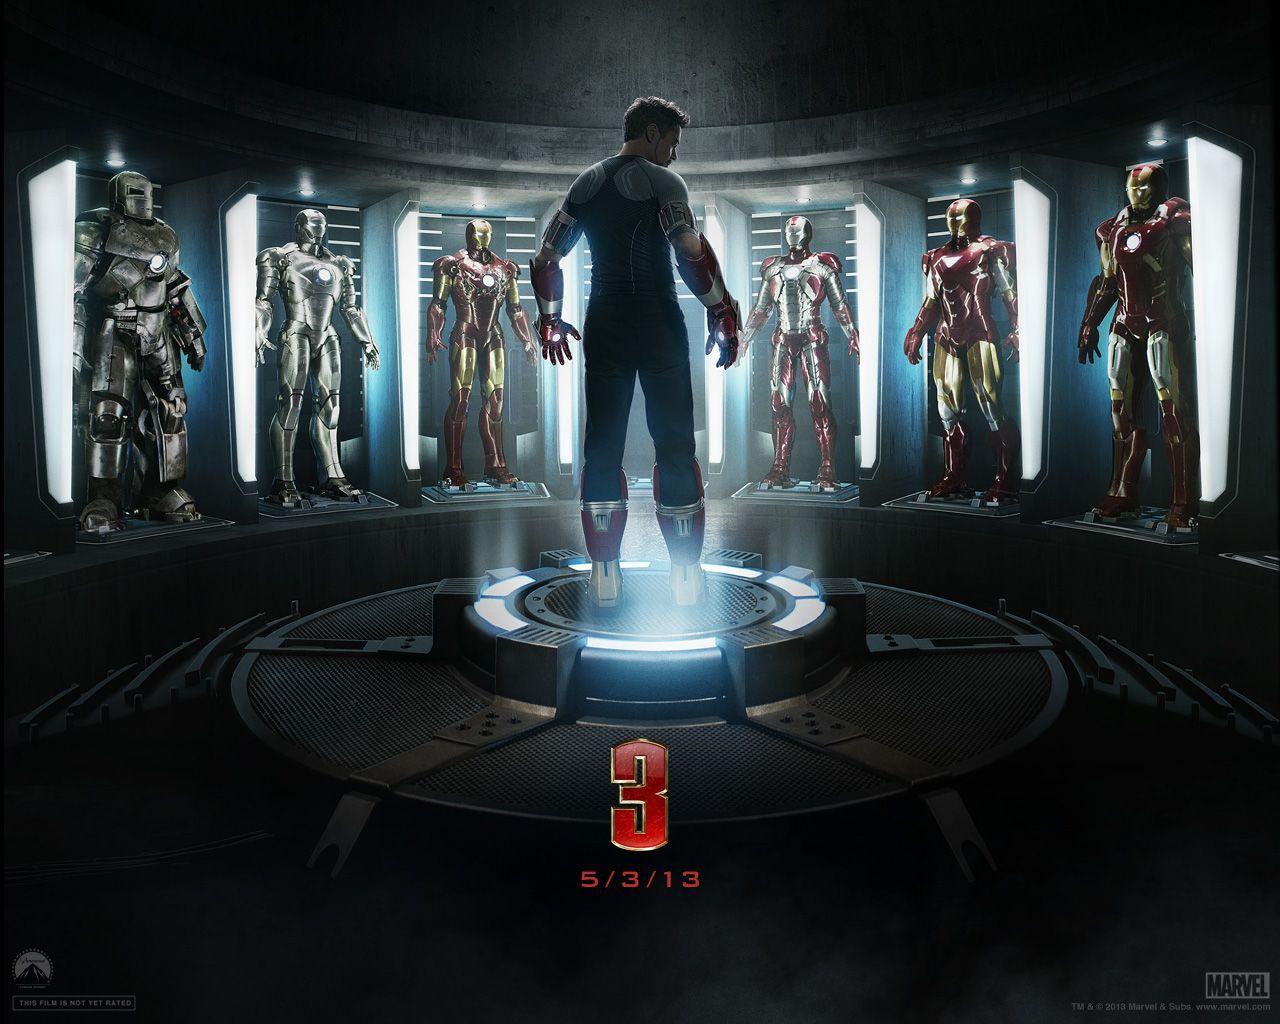 Everything about PowerPoint & Wallpaper: Free Download Official Iron Man 3 Movie Wallpaper